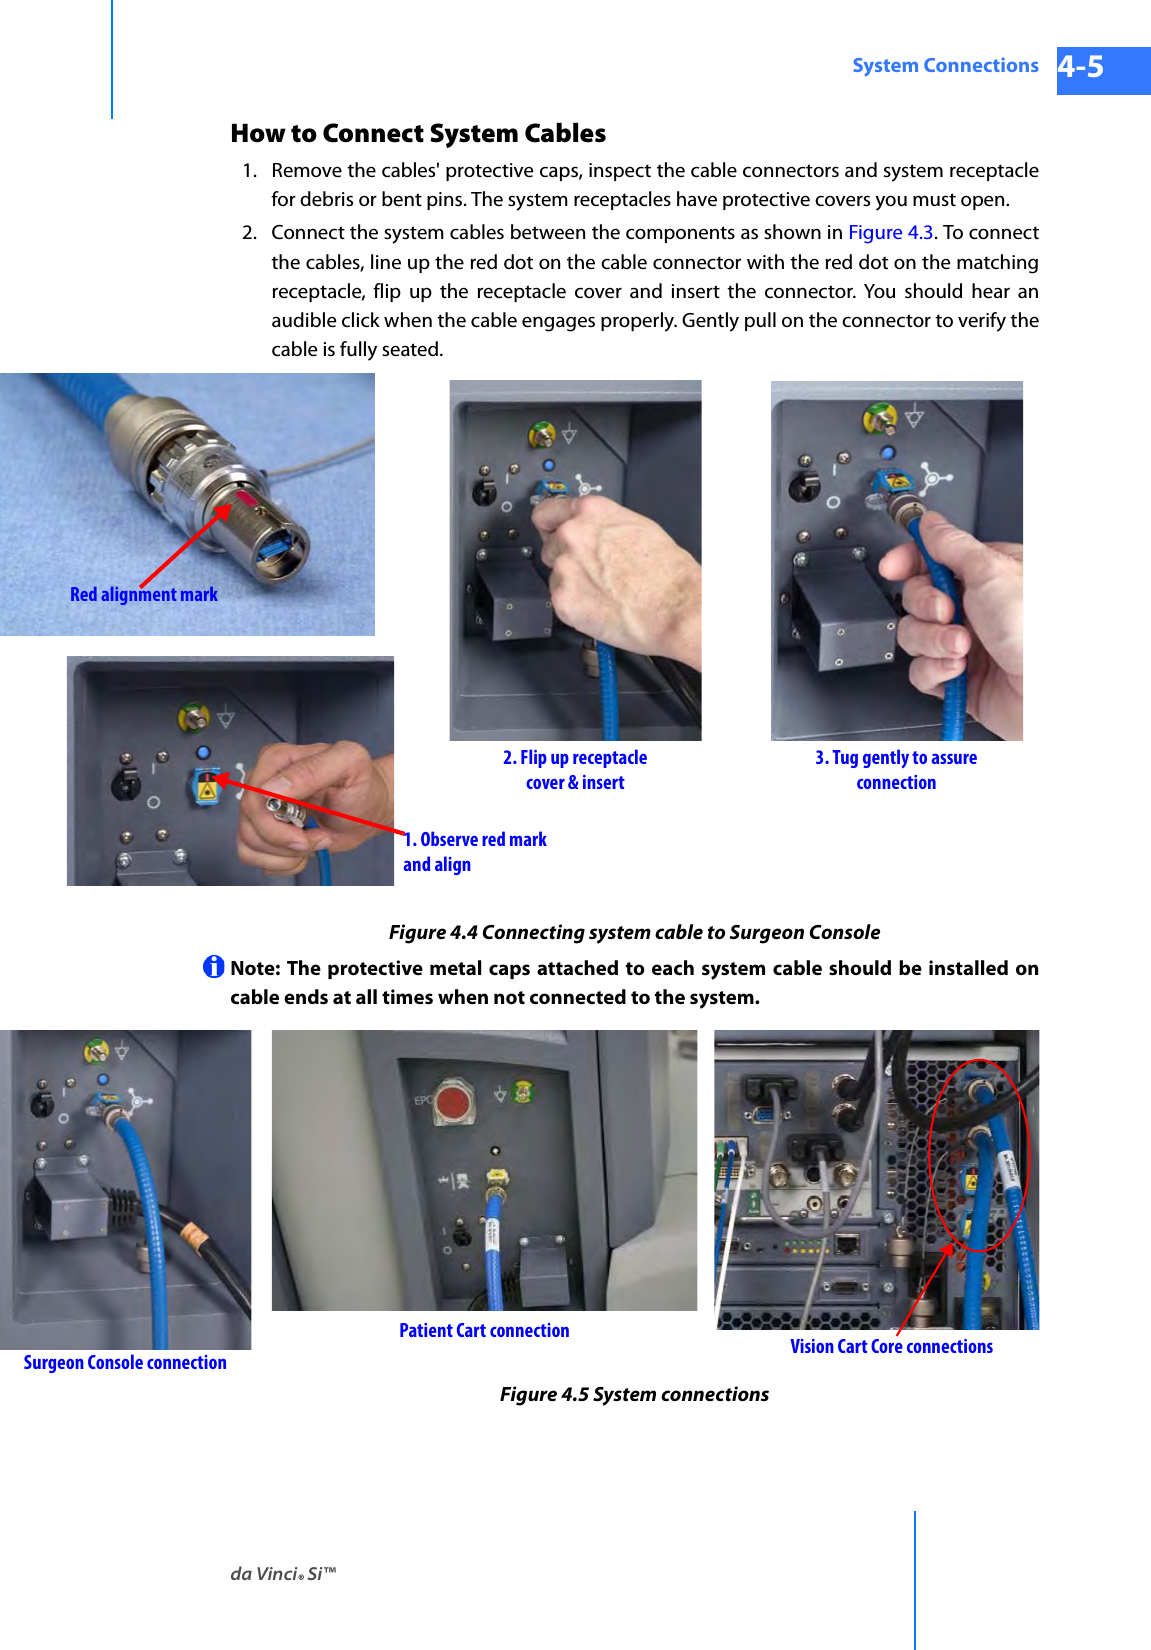 da Vinci® Si™System Connections 4-5DRAFT/PRE-RELEASE/CONFIDENTIAL 10/9/14How to Connect System Cables1. Remove the cables&apos; protective caps, inspect the cable connectors and system receptacle for debris or bent pins. The system receptacles have protective covers you must open.2. Connect the system cables between the components as shown in Figure 4.3. To connect the cables, line up the red dot on the cable connector with the red dot on the matching receptacle, flip up the receptacle cover and insert the connector. You should hear an audible click when the cable engages properly. Gently pull on the connector to verify the cable is fully seated. Figure 4.4 Connecting system cable to Surgeon ConsoleNote: The protective metal caps attached to each system cable should be installed on cable ends at all times when not connected to the system.Figure 4.5 System connectionsRed alignment mark1. Observe red mark and align2. Flip up receptacle cover &amp; insert3. Tug gently to assure connectionPatient Cart connection Vision Cart Core connectionsSurgeon Console connection